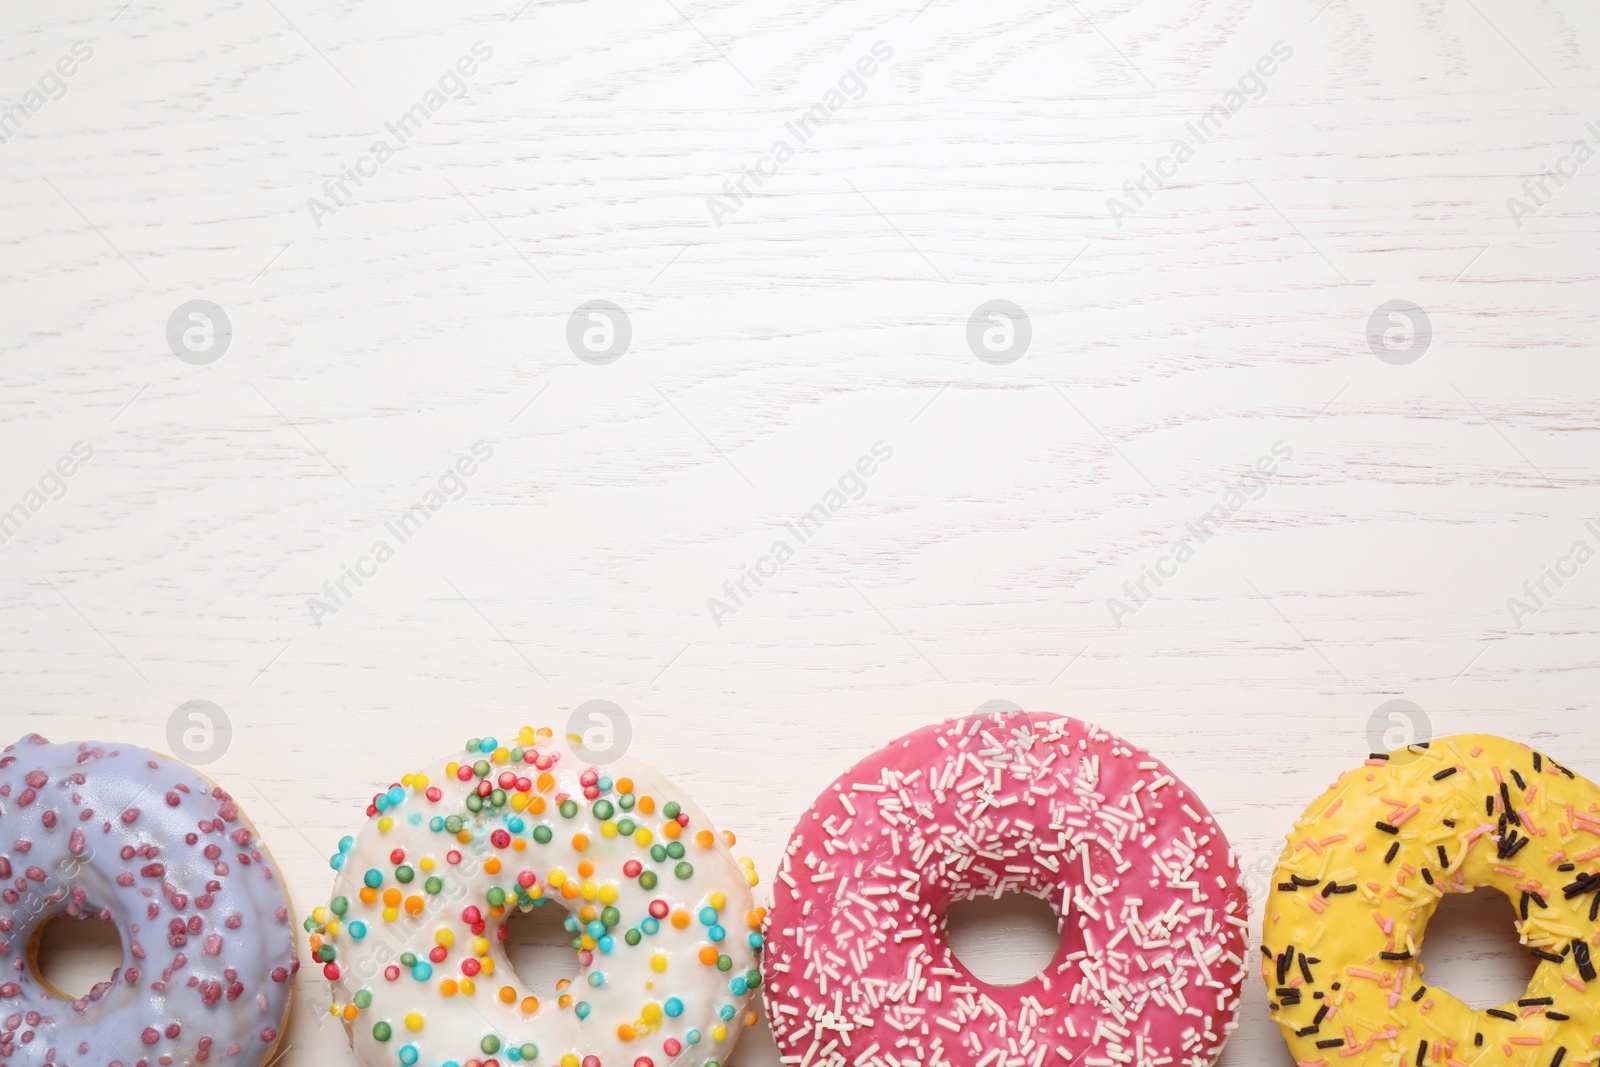 Photo of Delicious glazed donuts on white wooden table, flat lay. Space for text